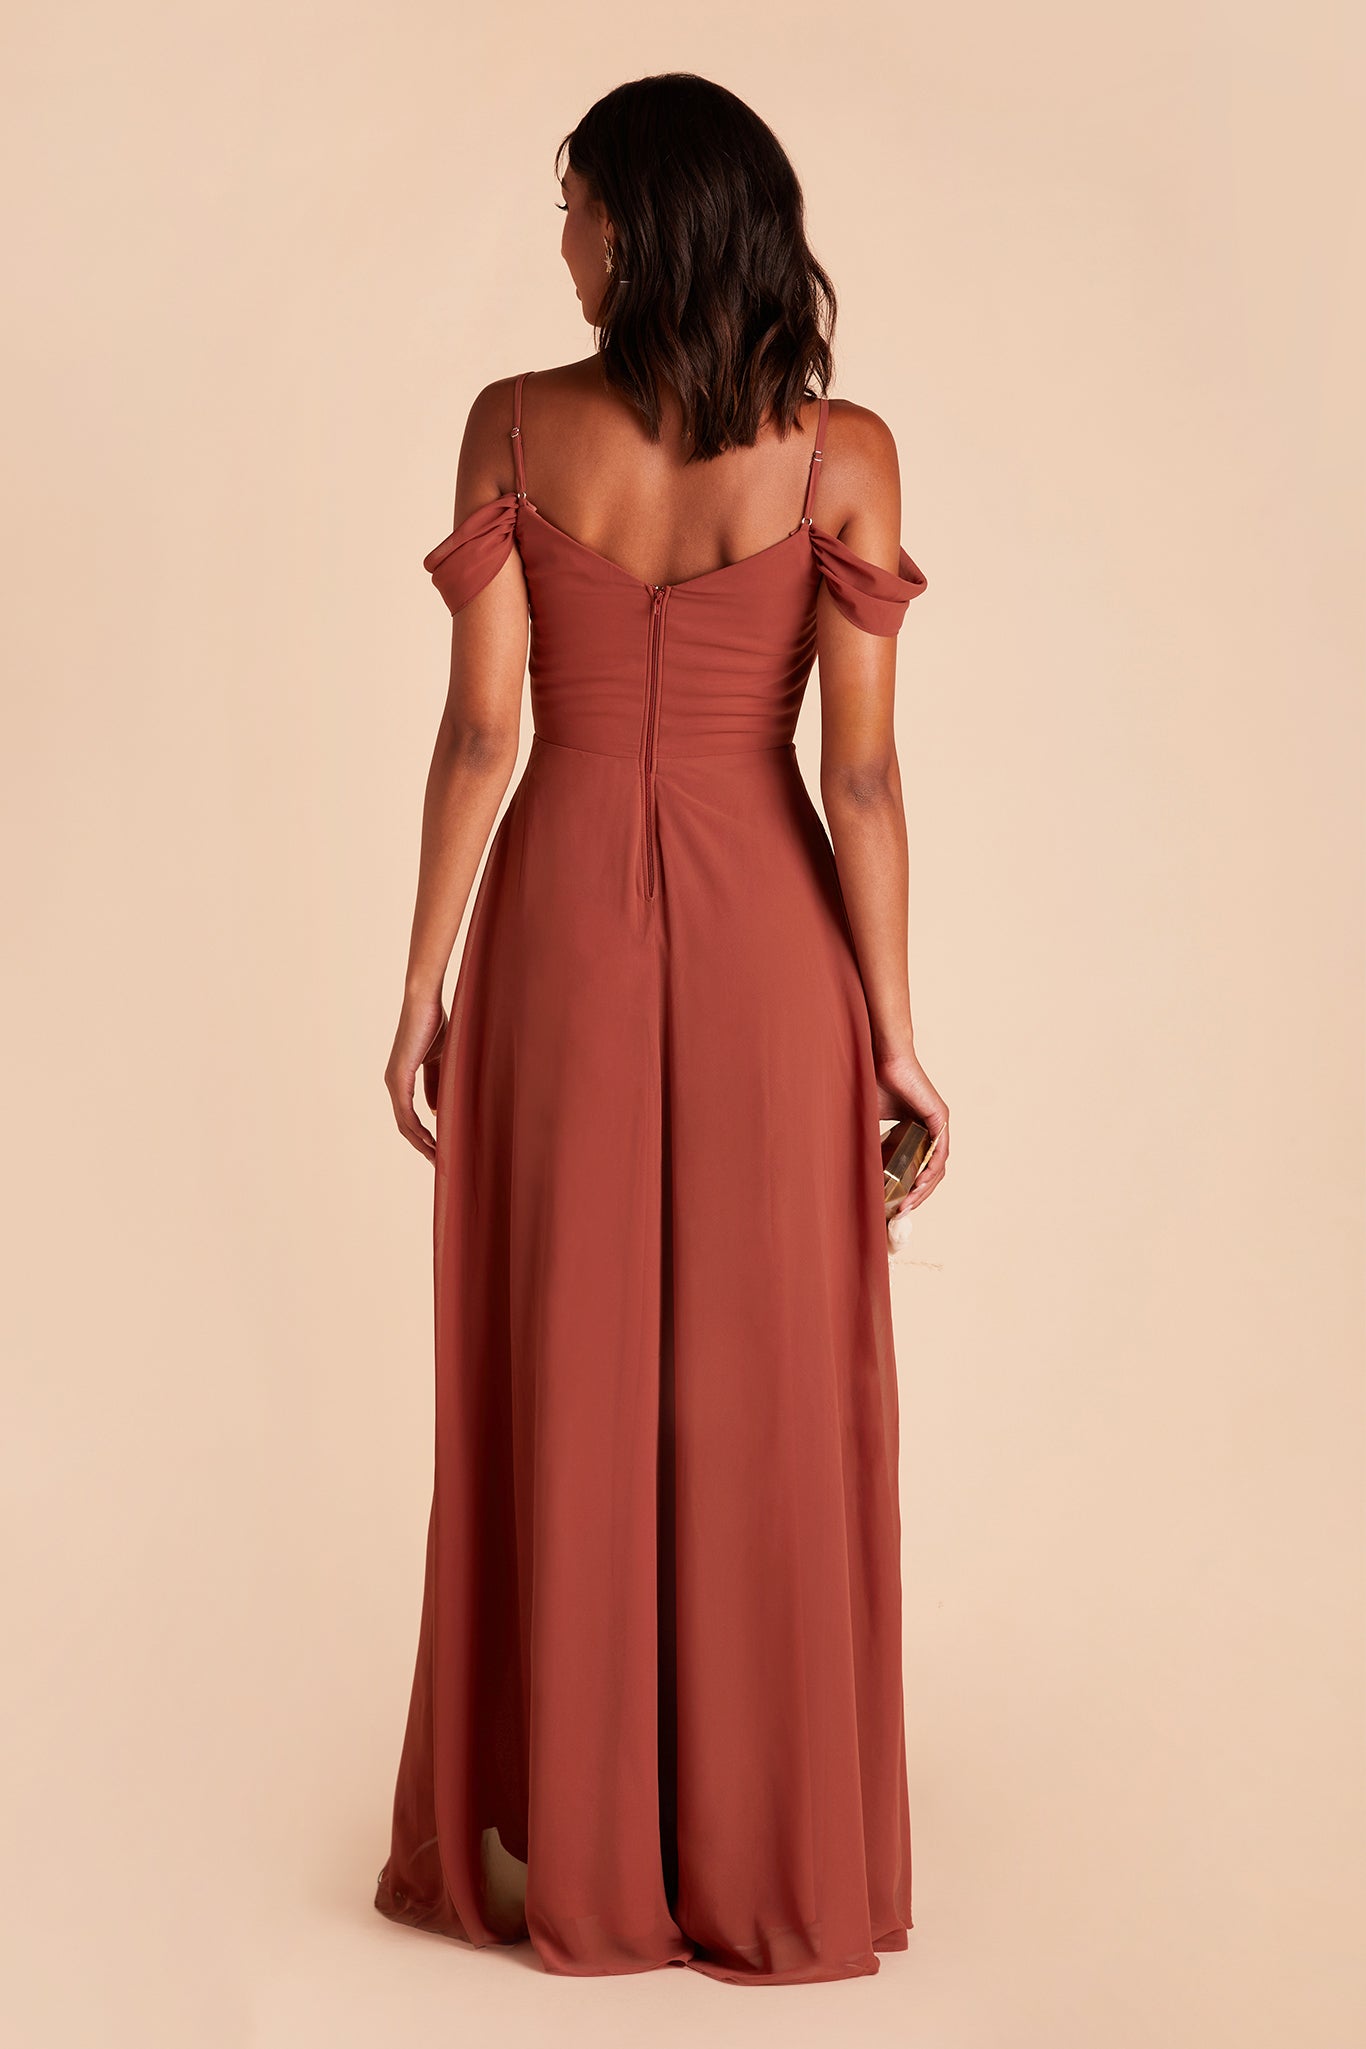 Devin convertible bridesmaids dress with slit in spice chiffon by Birdy Grey, back view